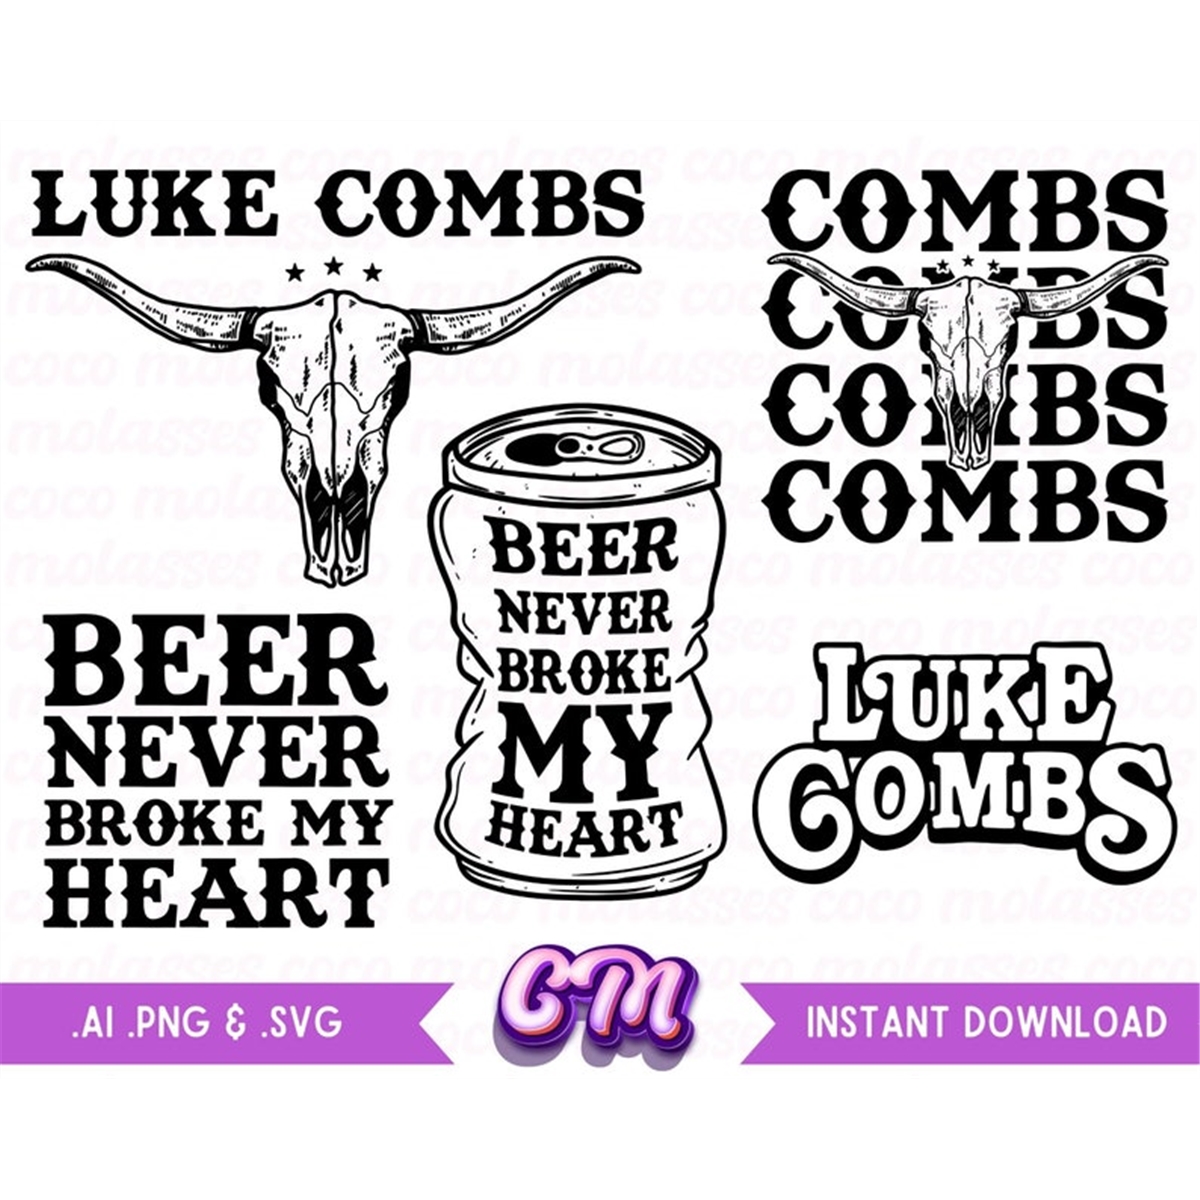 luke-combs-country-music-svg-bundle-instant-download-svg-image-1